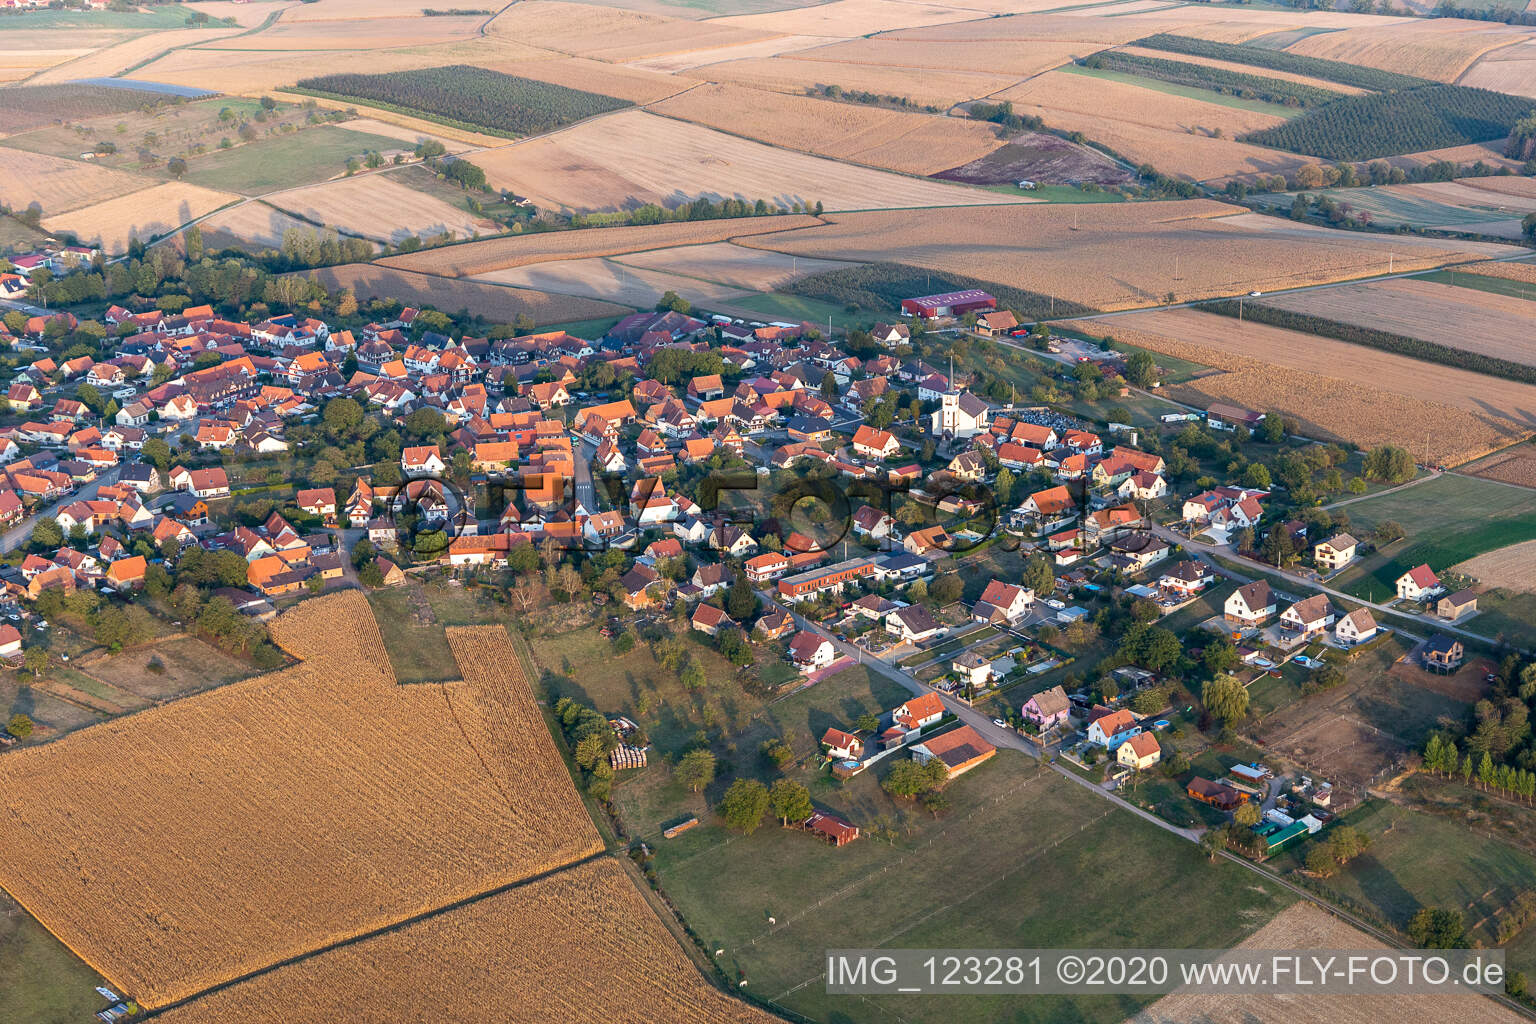 Schœnenbourg in the state Bas-Rhin, France seen from above